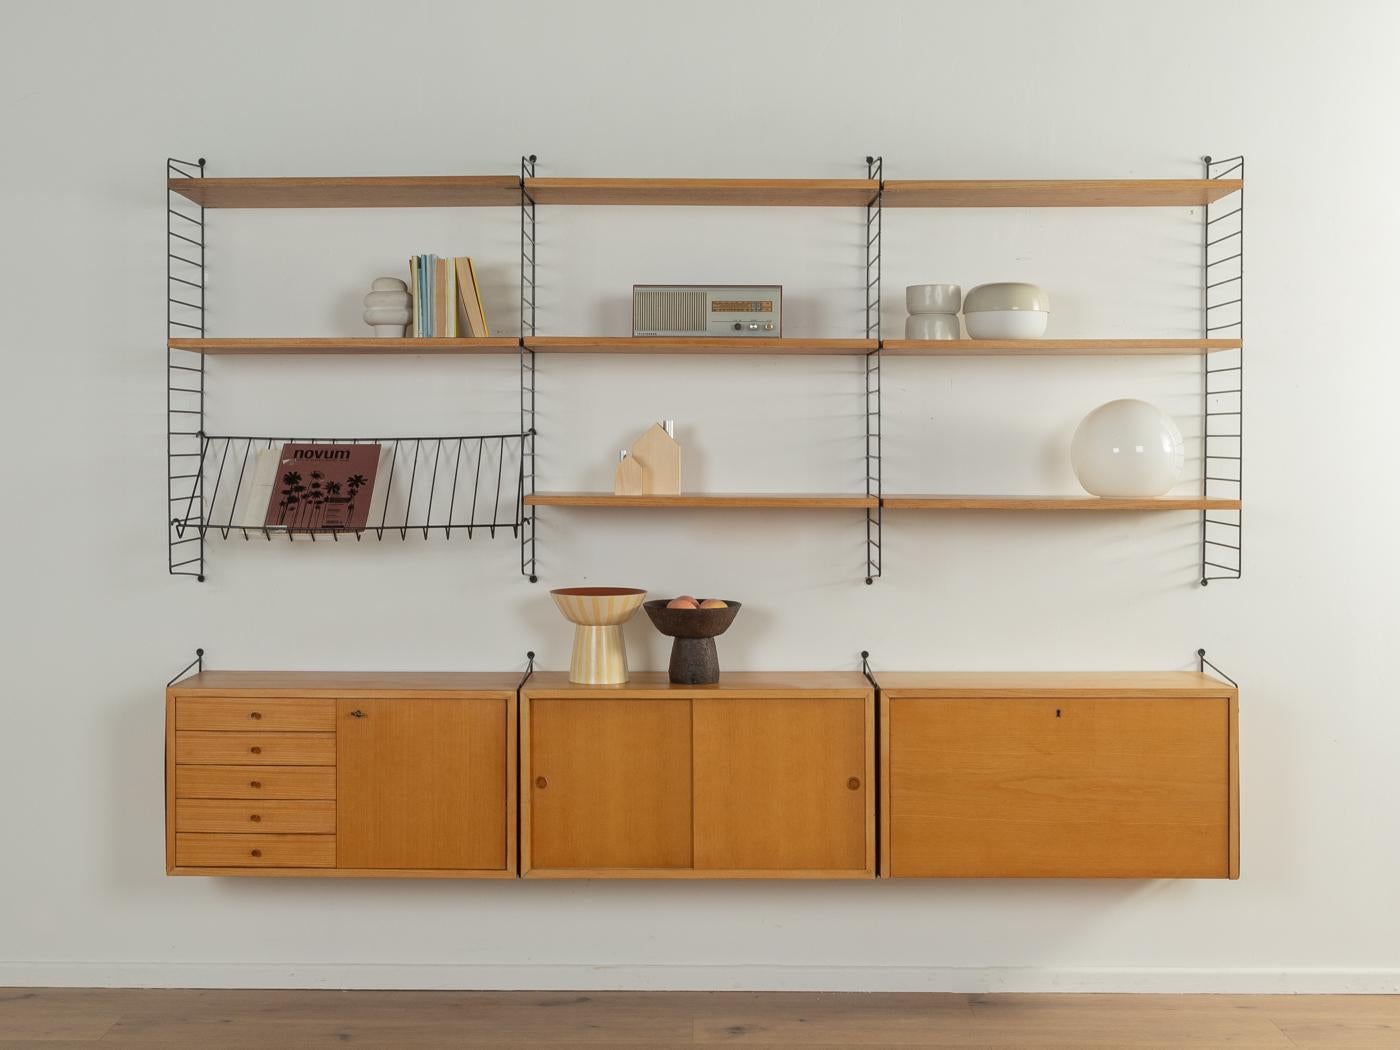 Original String Shelf designed in 1949 by Nils Strinning in ash veneer. The system consists of eight metal ladders in black with eight shelves, a magazine rack, one container with five drawers and a door, one container with sliding doors, a